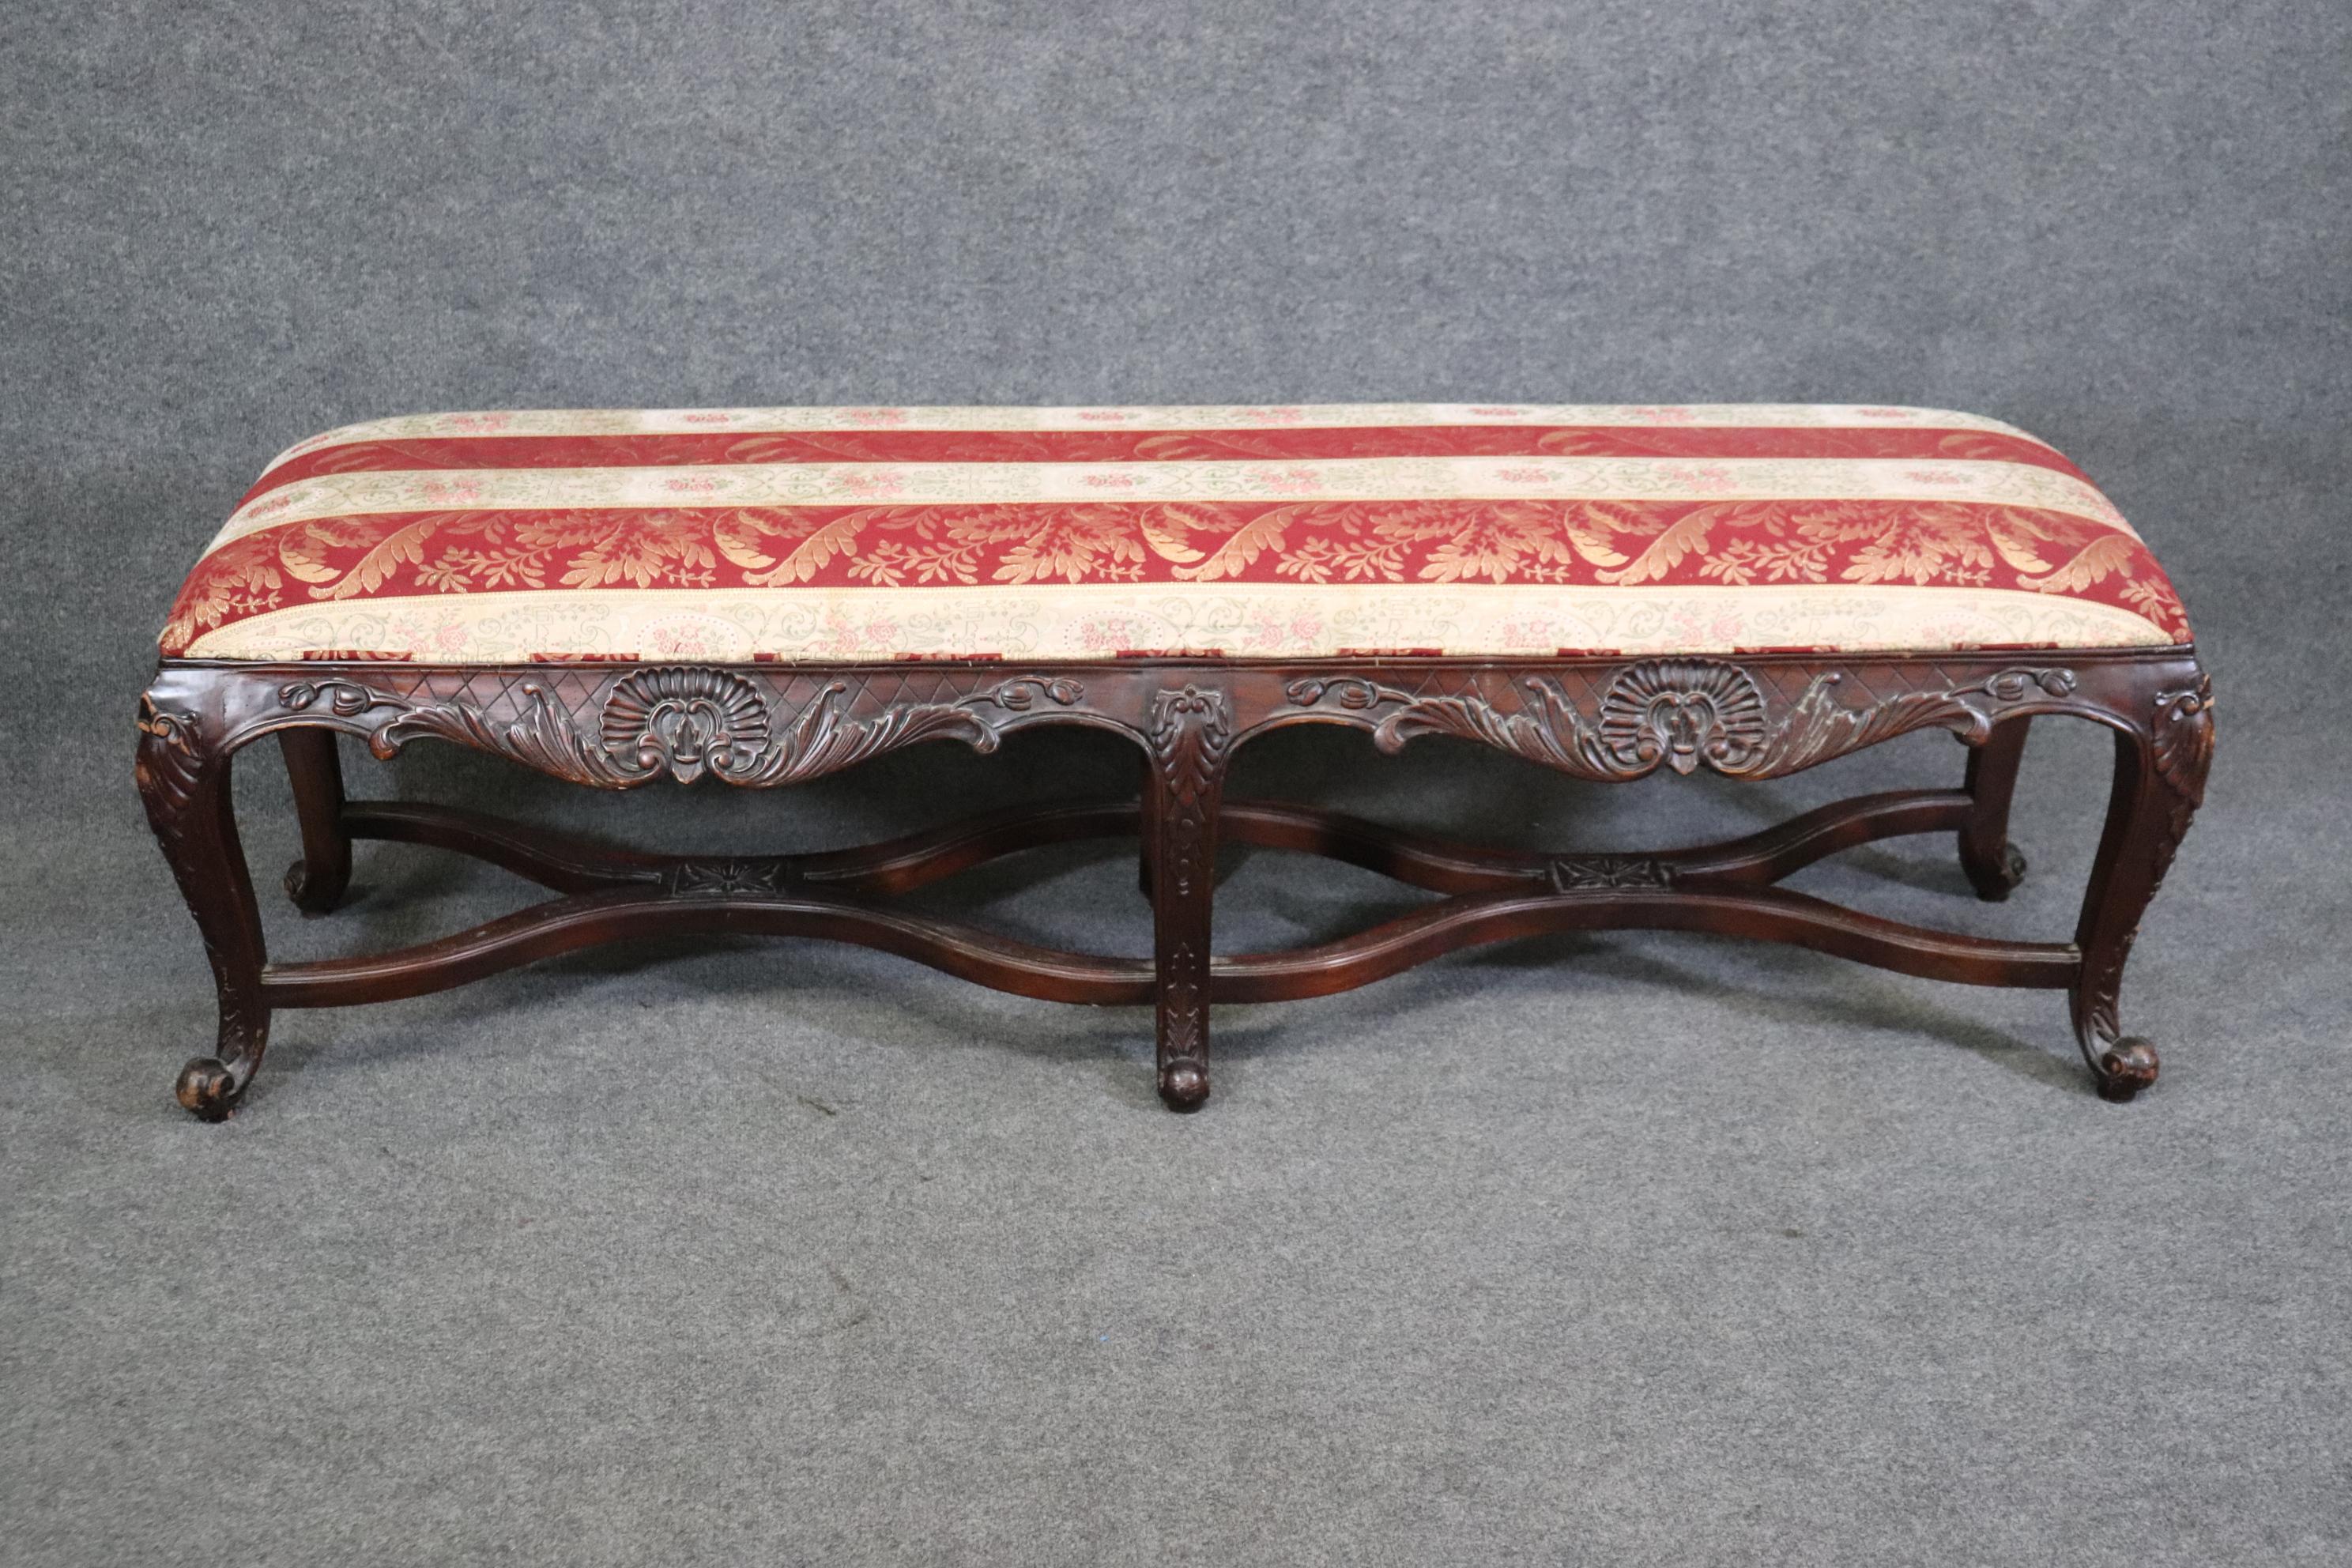 Dimensions - H: 21 1/2in W: 68 1/2in D: 18 1/2in 

This Country French Louis XV style carved window bench is made of the highest quality! If you look a the photos provided, you will see the sophisticated red and gold upholstery as well as the